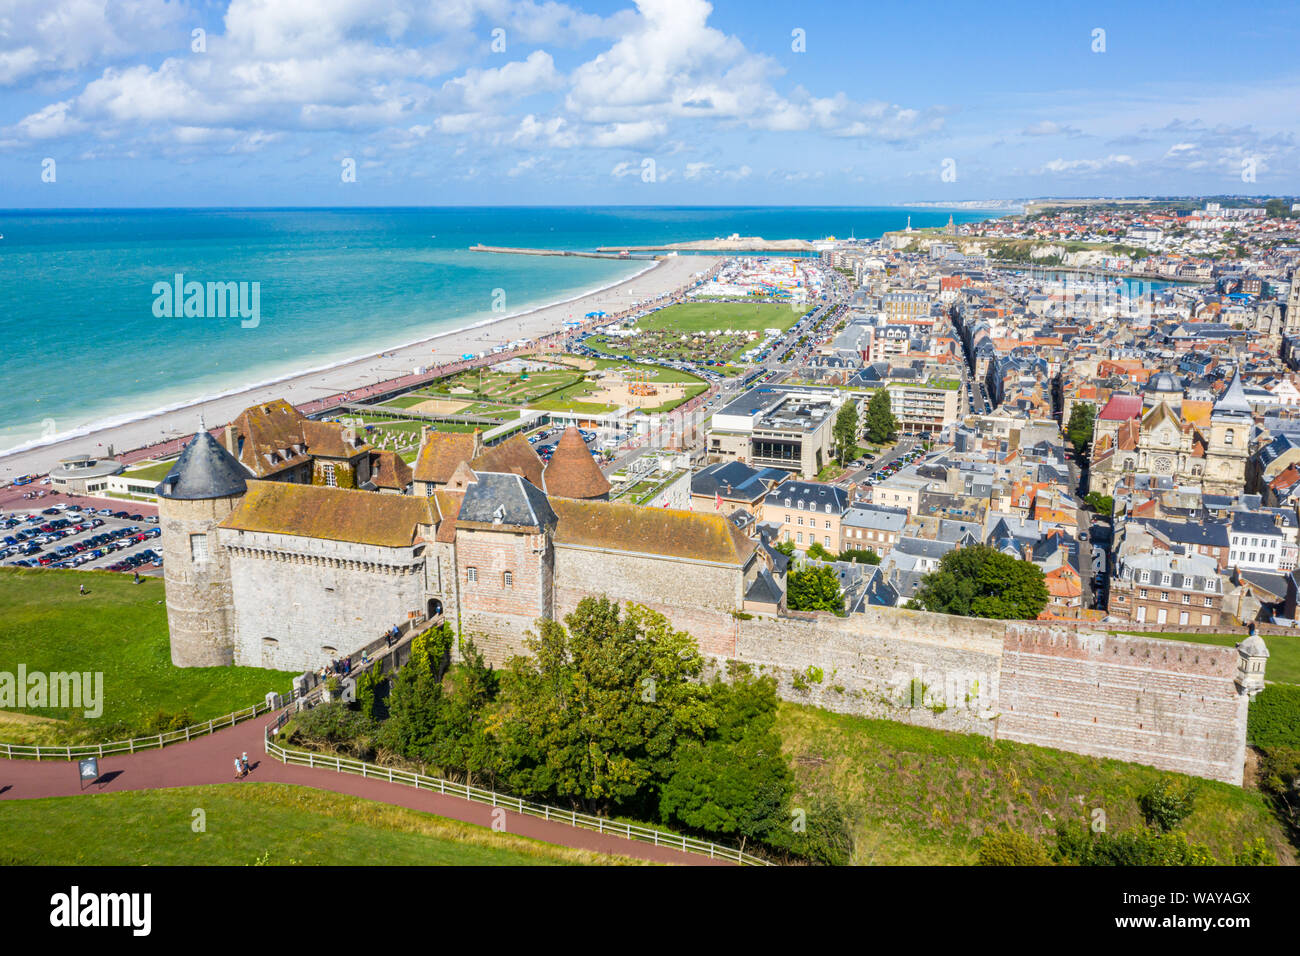 Aerial view of Dieppe town, the fishing port on the English Channel, at the mouth of Arques river. On a clifftop overlooking pebbly Dieppe Beach is th Stock Photo